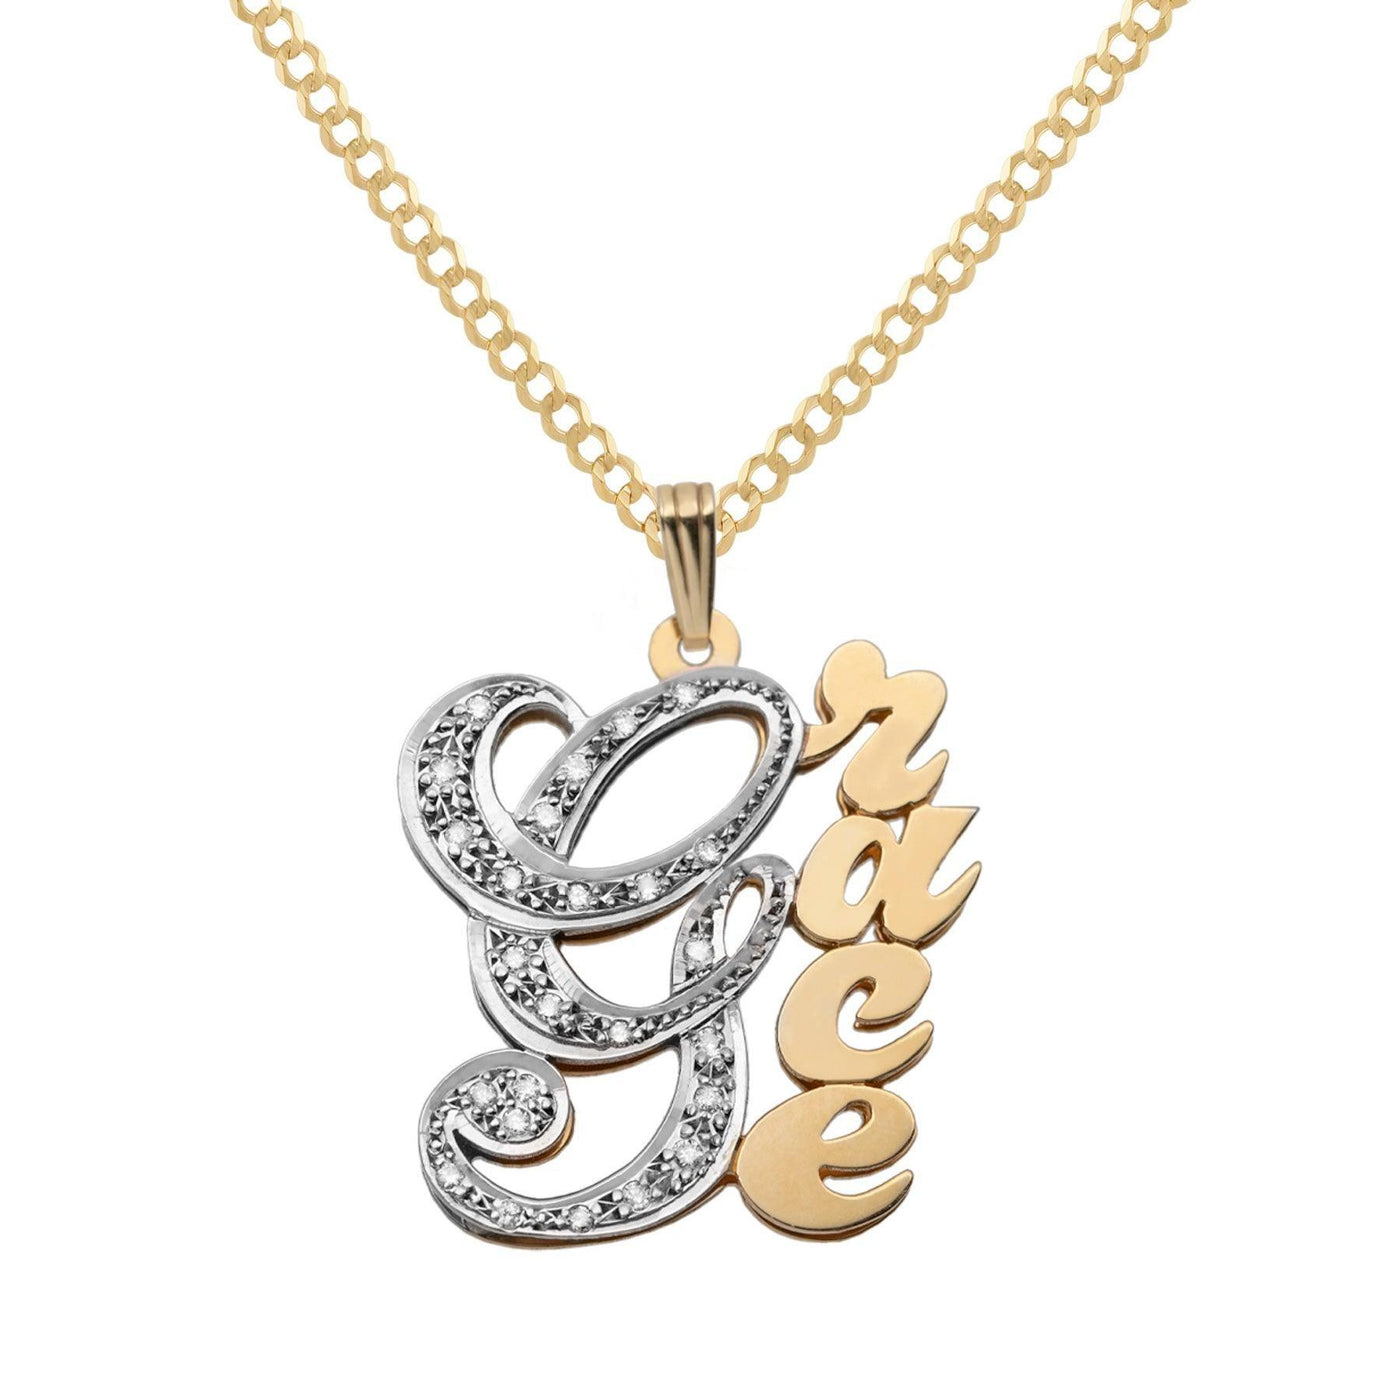 Ladies Diamond Vertical Script Name Plate Necklace 14K Gold - Style 103 - bayamjewelry